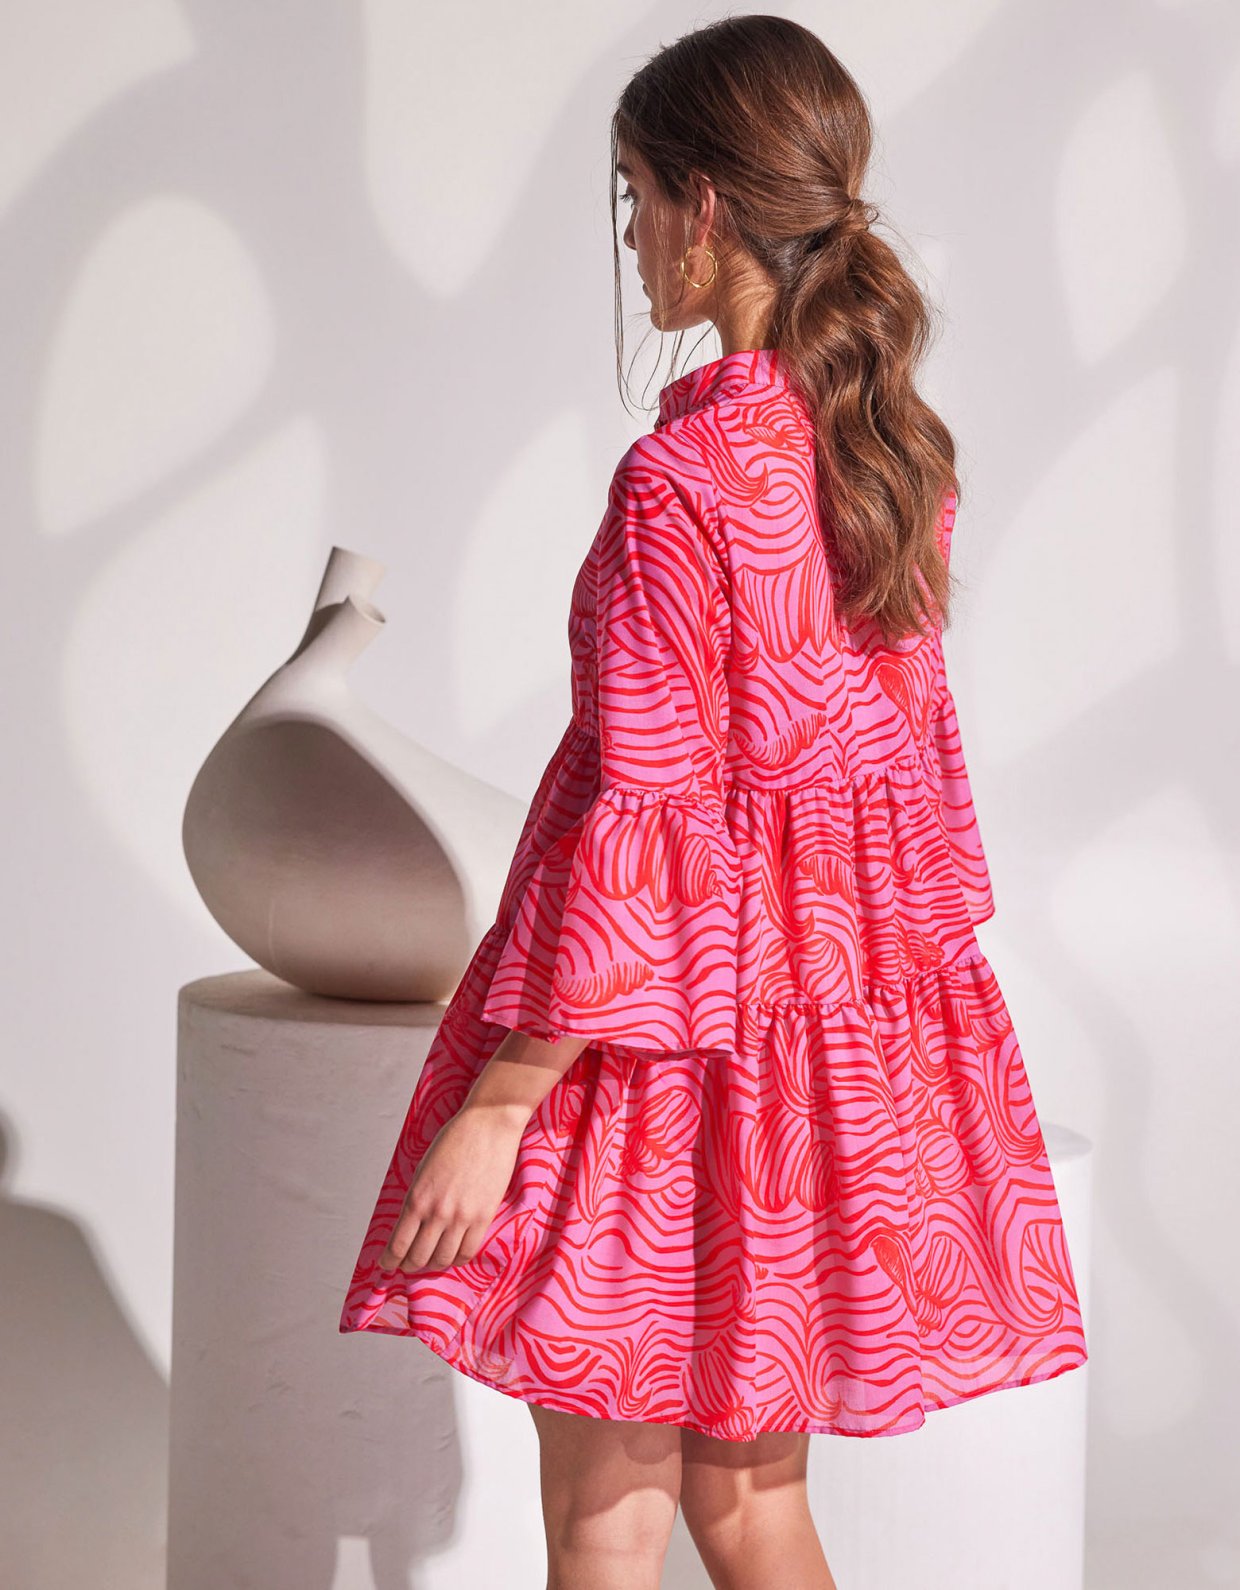 The Knl's Giornata ruffle dress pink waves